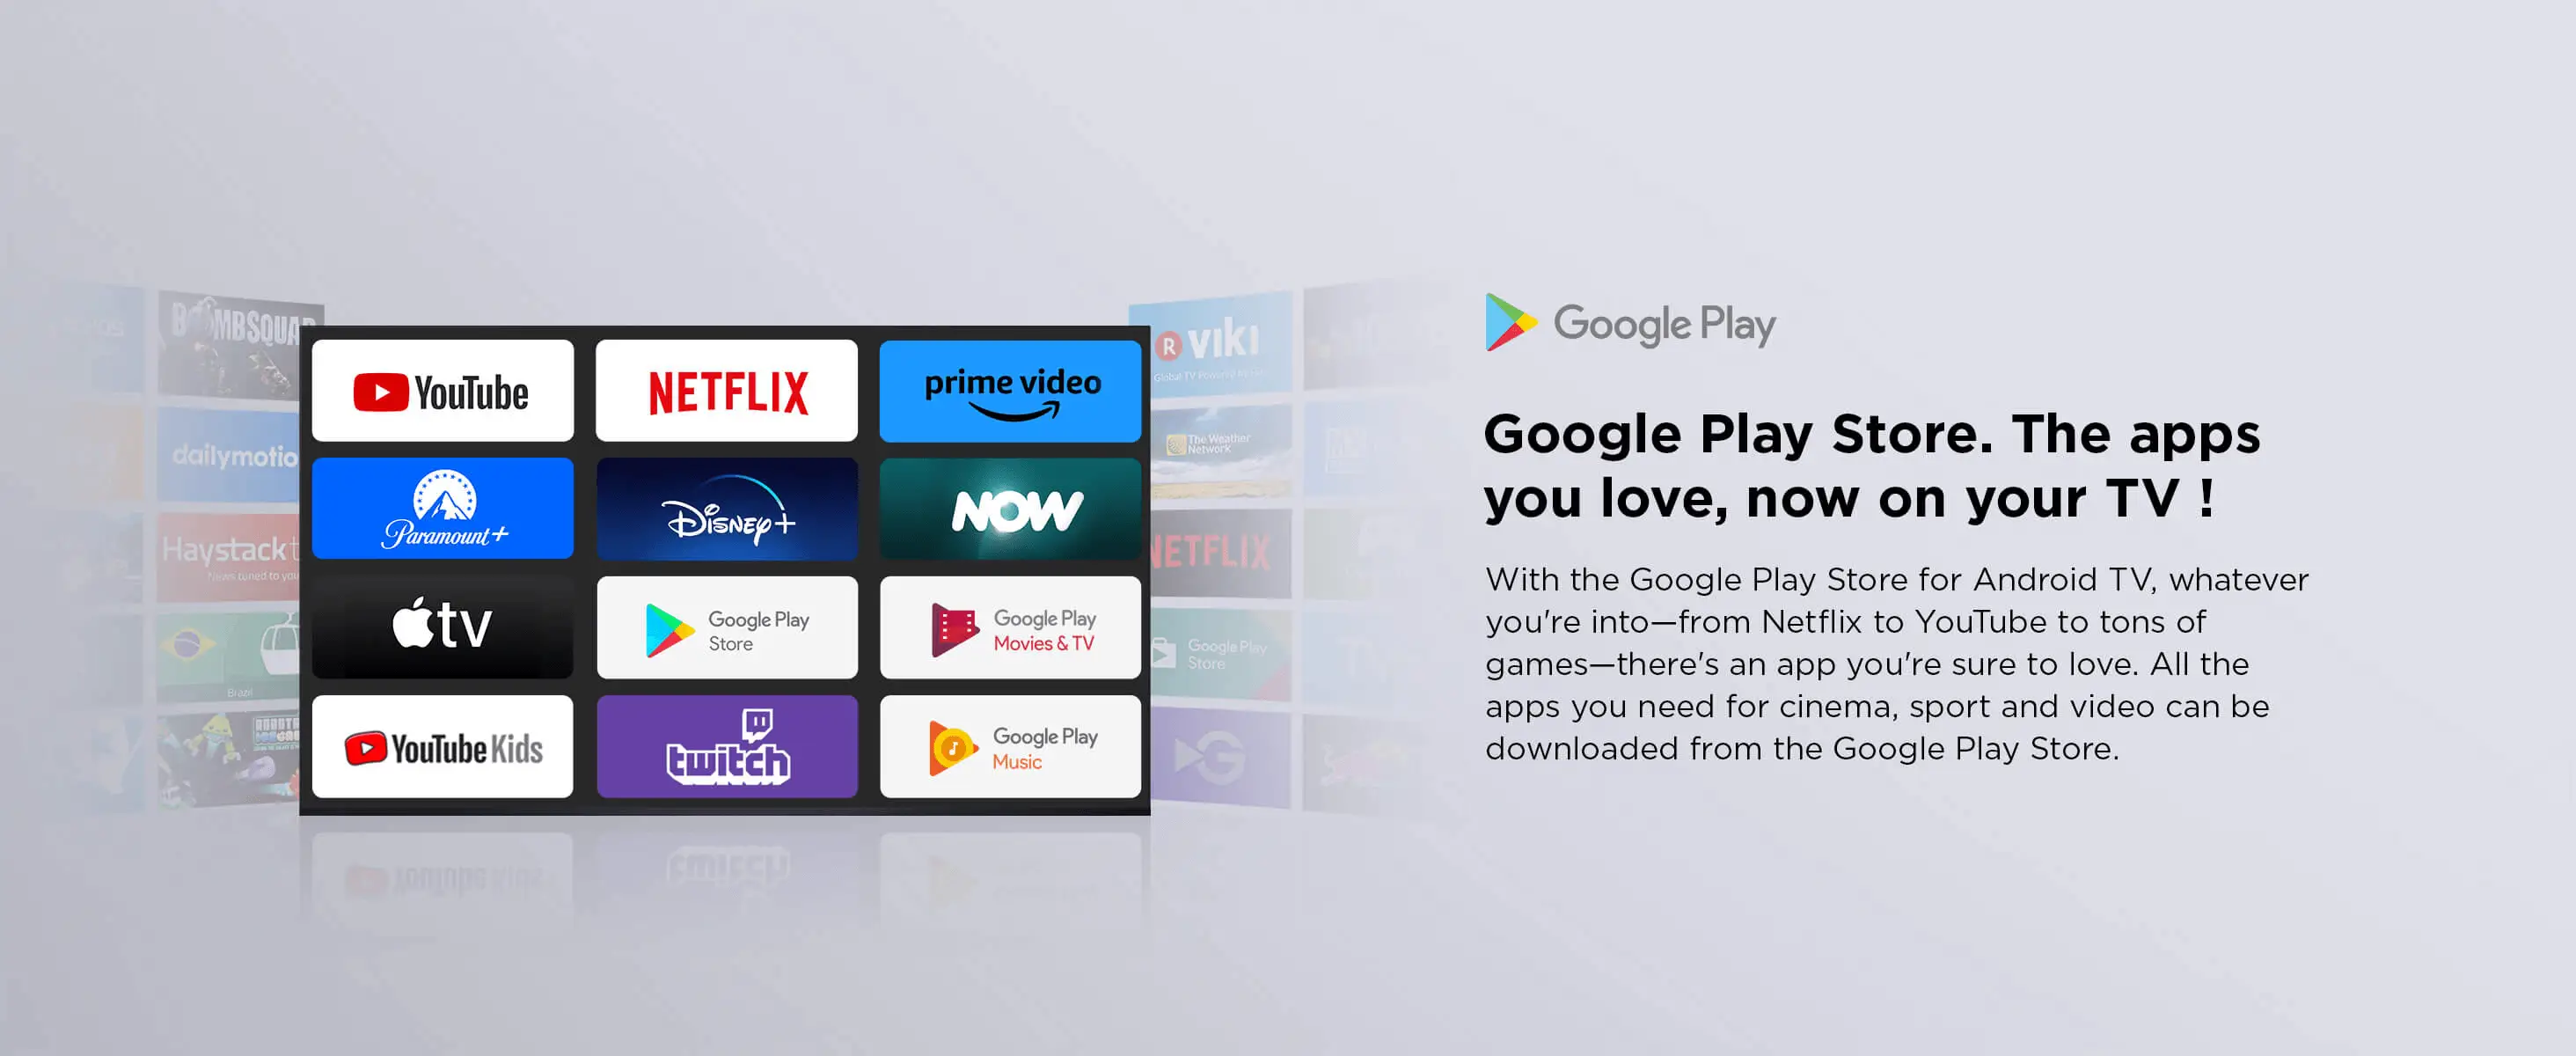 The apps you love, now on your TV !